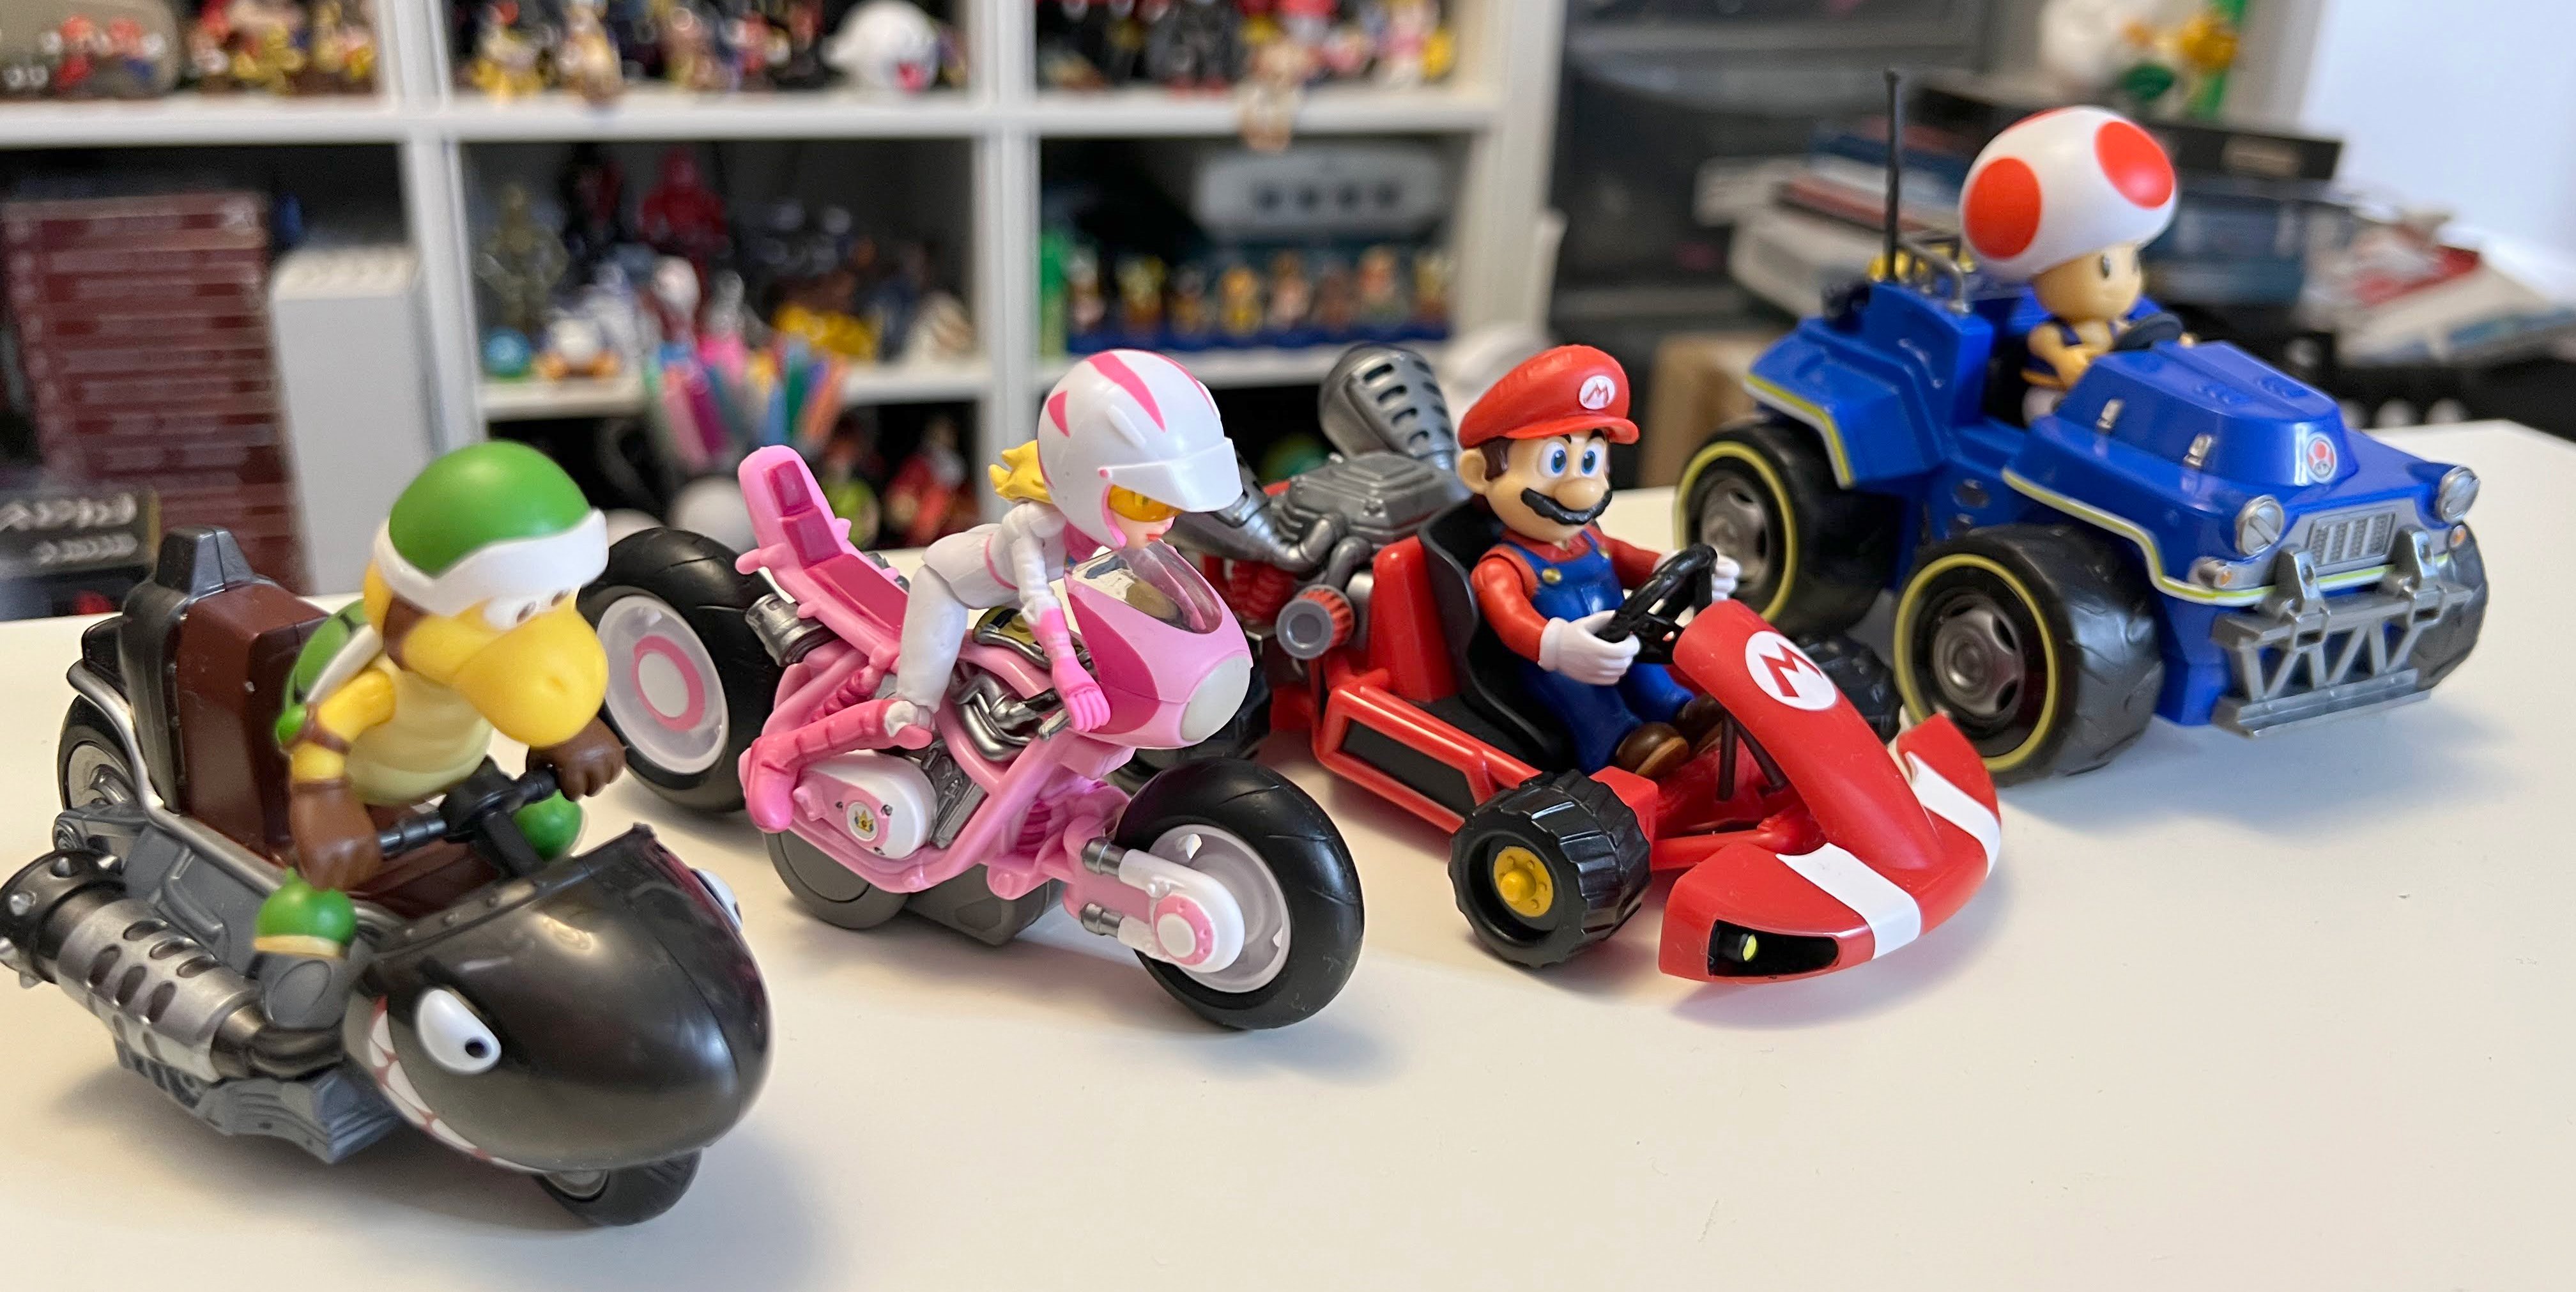 Super Mario Toys, Movie and Game Figures Collection